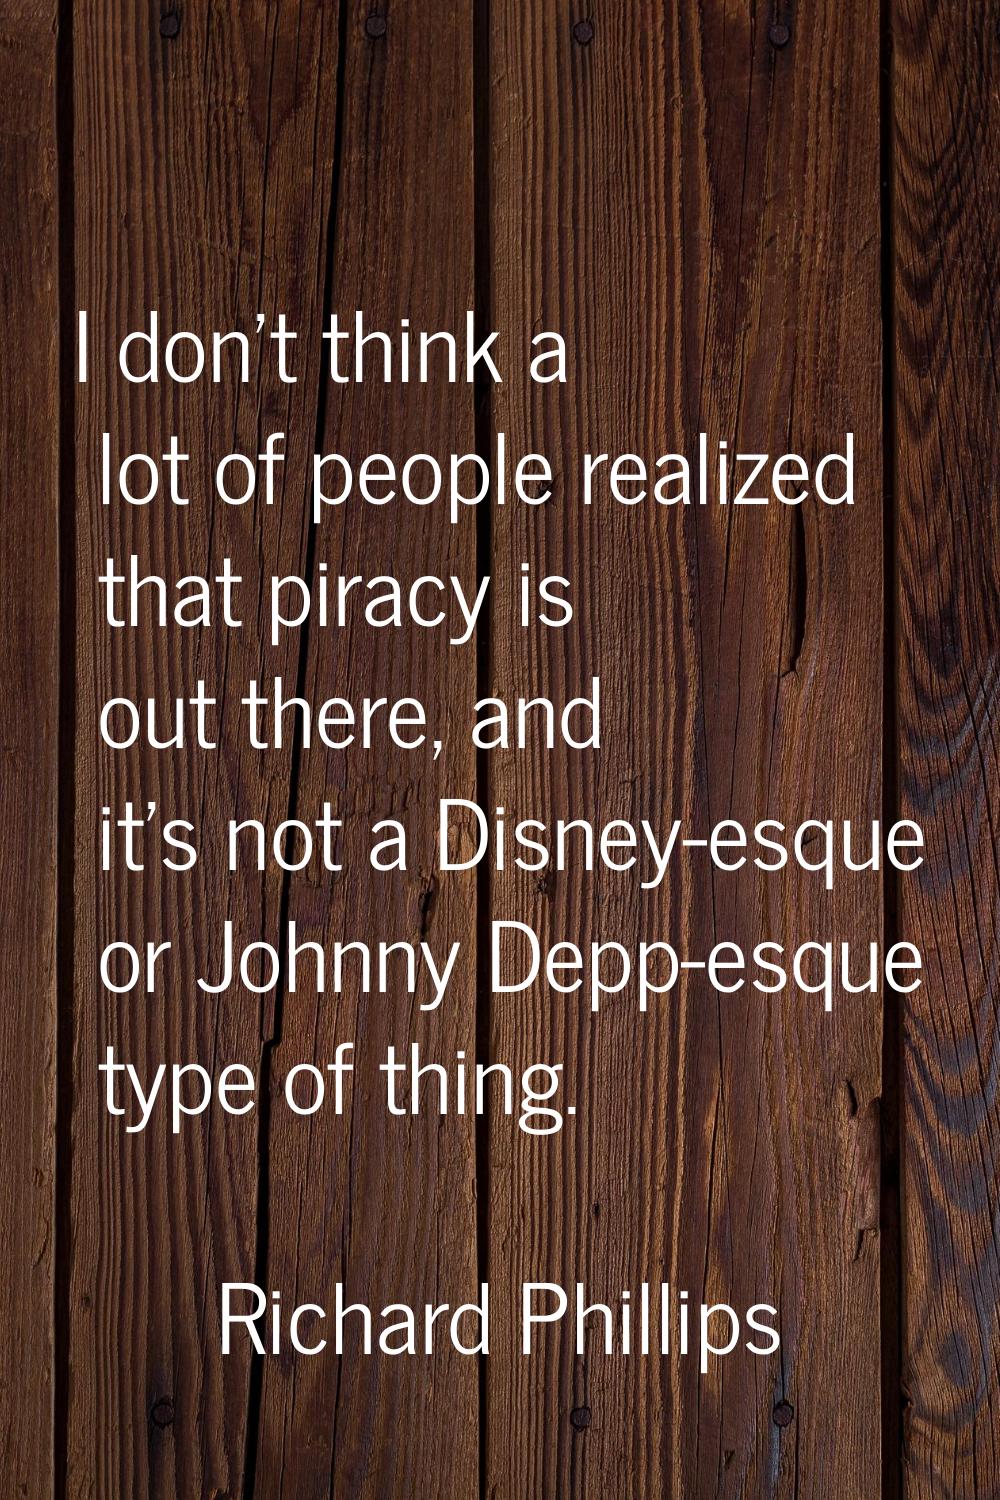 I don't think a lot of people realized that piracy is out there, and it's not a Disney-esque or Joh